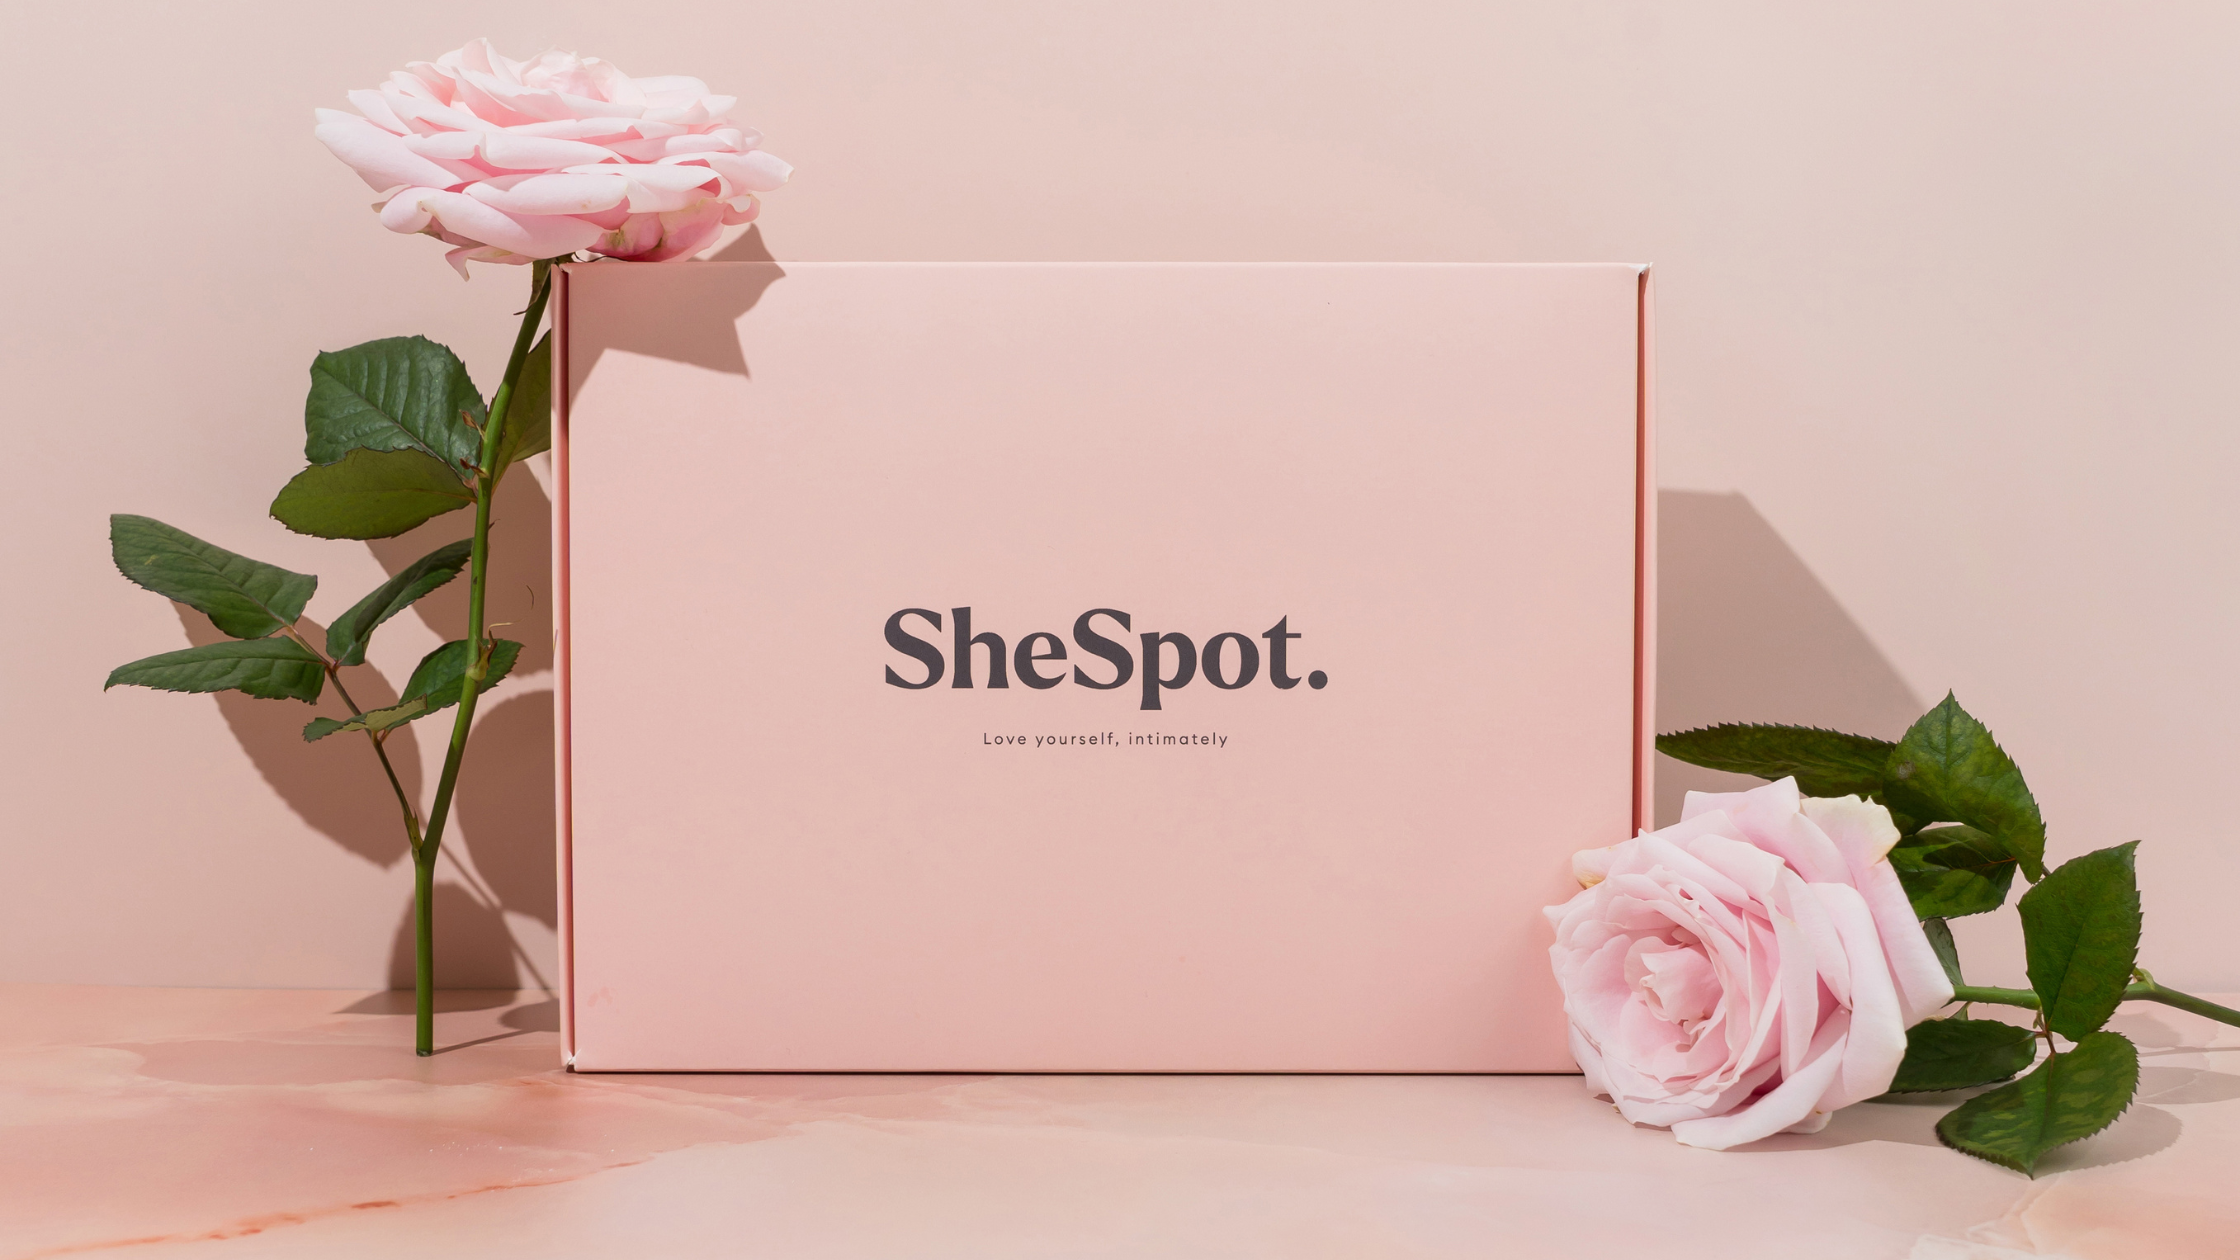 SheSpot launches partnership with Sephora!